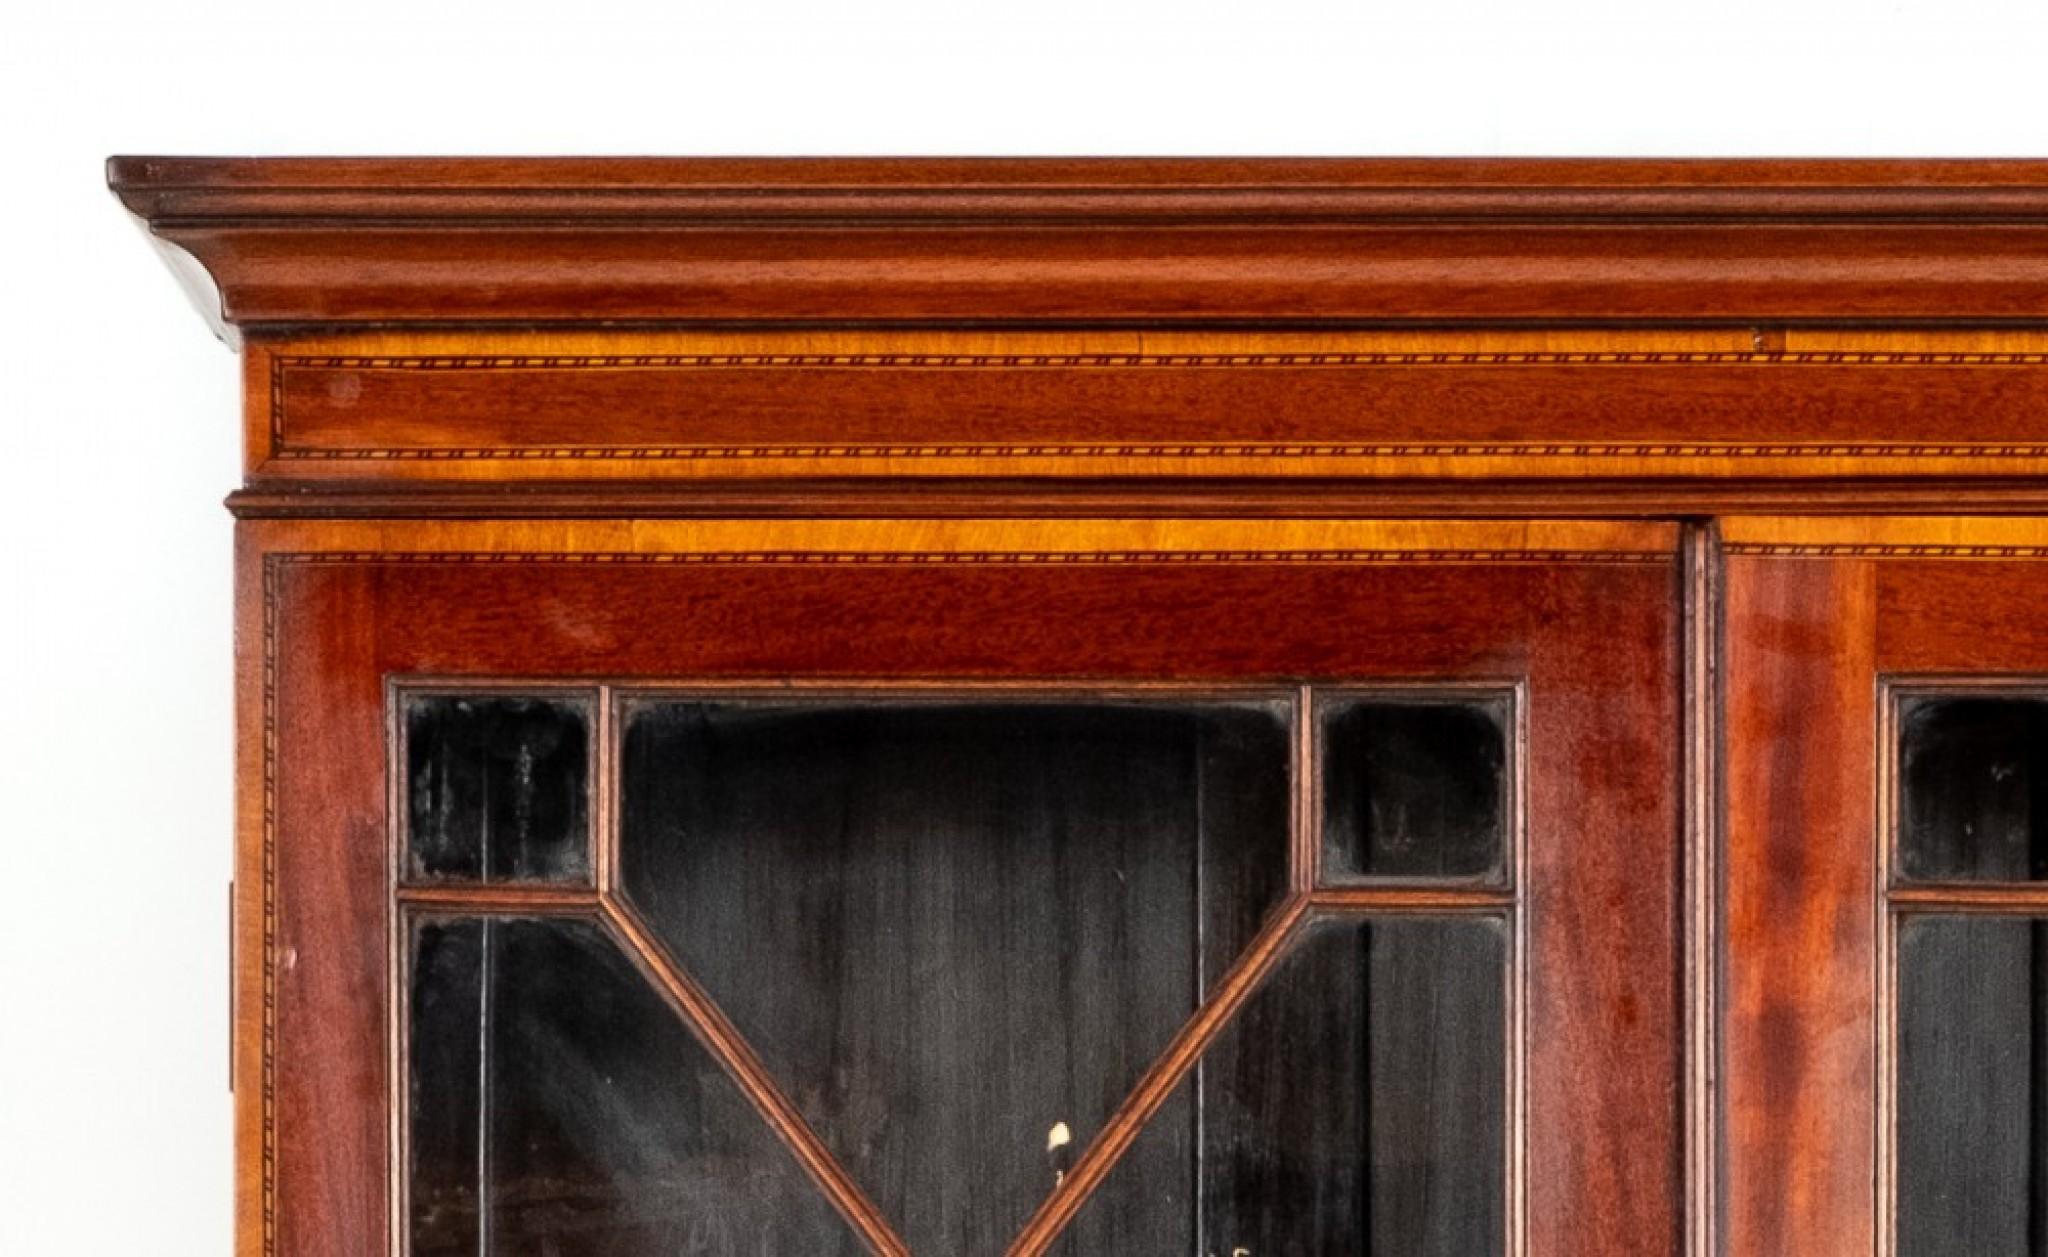 Georgian Mahogany Bureau Bookcase.
The Base Having an Arrangement of 2 Over 3 Oak Lined Drawers With Brass Swan Neck handles.
Circa 1800
The Fall Opens to Reveal a Leather Writing Surface (replacement) with hand Applied Gilt and Blind Tooling and